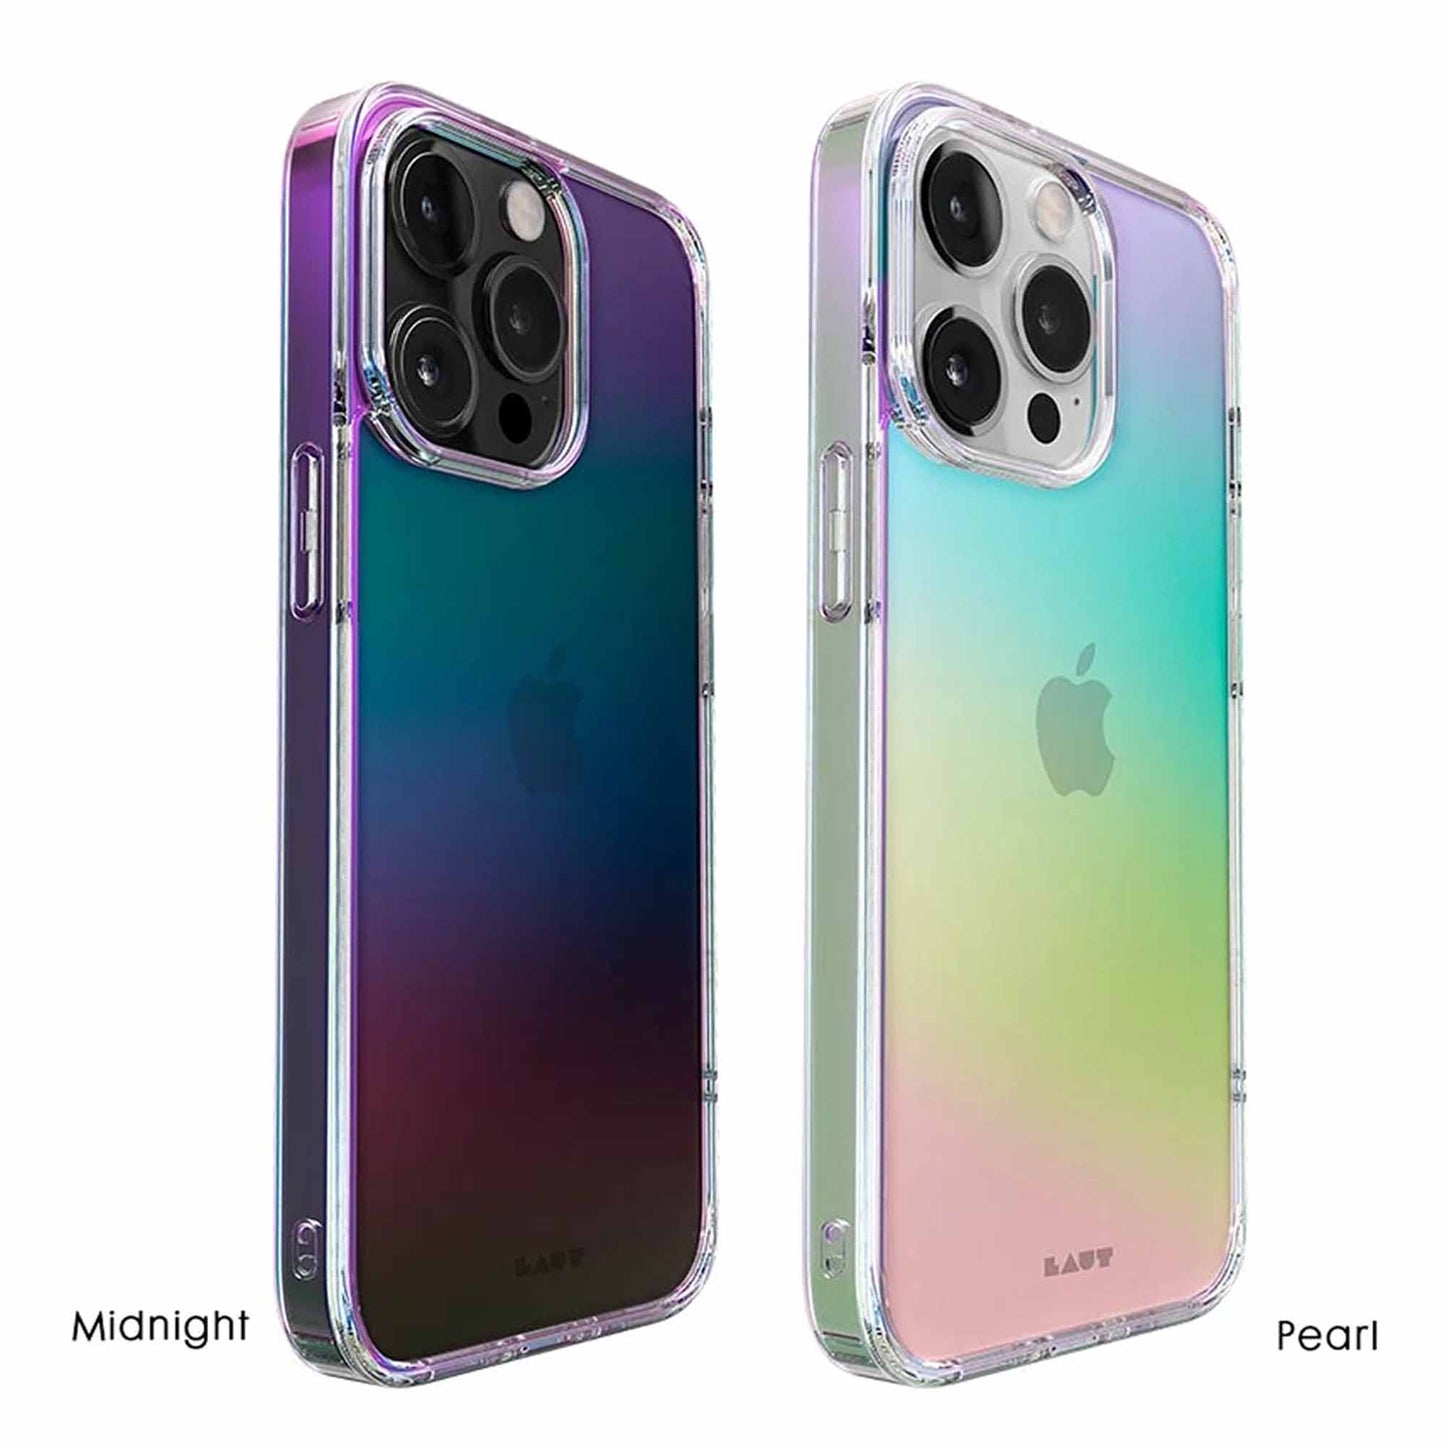 LAUT HOLO Case for iPhone 13 6.1" 5G - Midnight (Barcode: 4895206927505 )